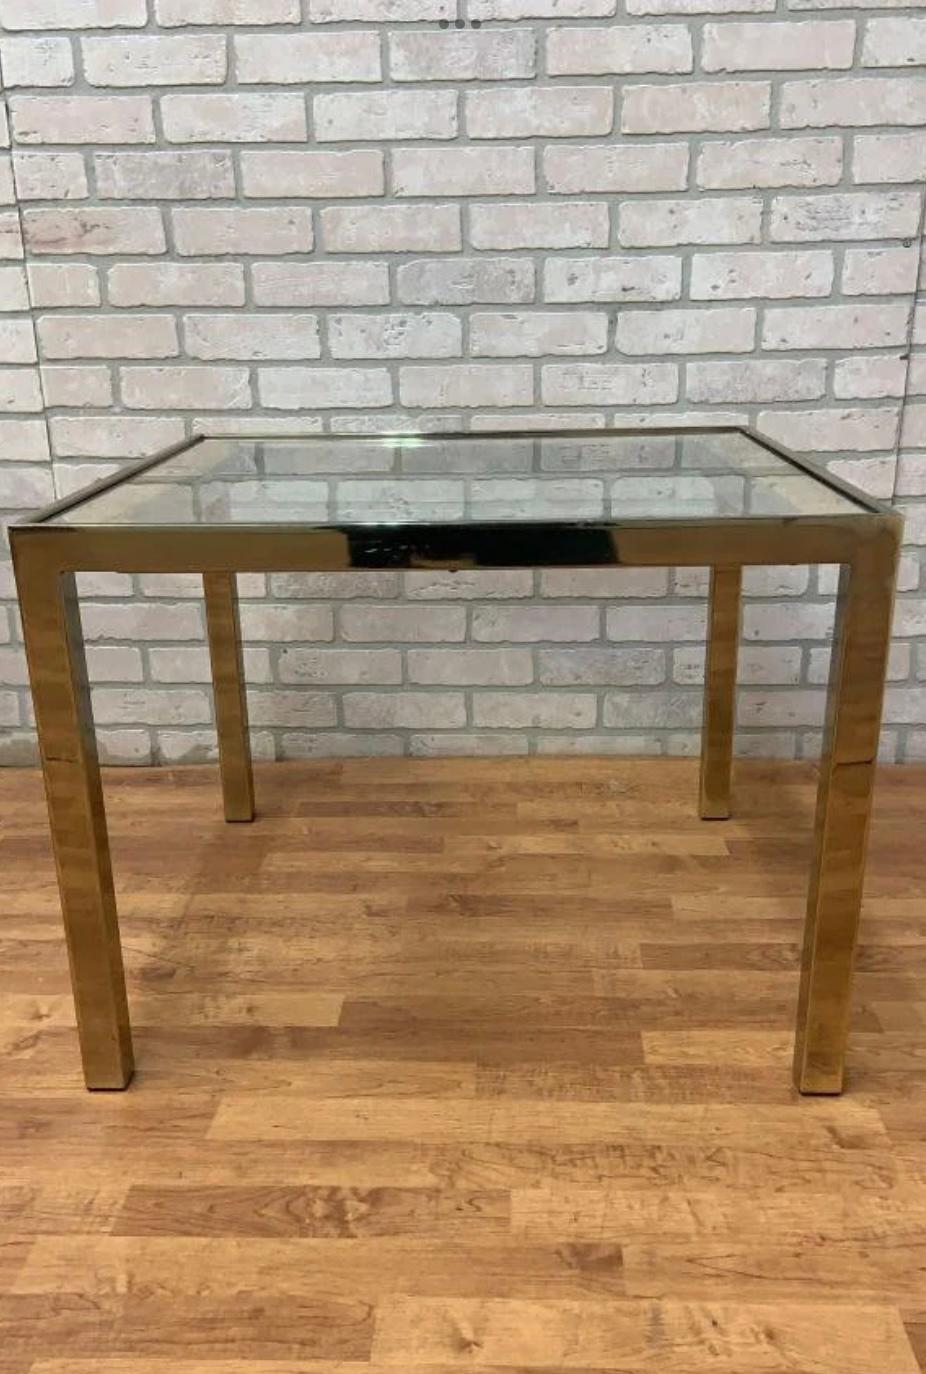 Mid Century Modern Rattan and Gold Brass Glass Top Side Table

This vintage mid century modern side table is sure to be the talk of the room! With its rattan and glass inlaid table with gold brass legs it is the perfect piece from the 70s to bring